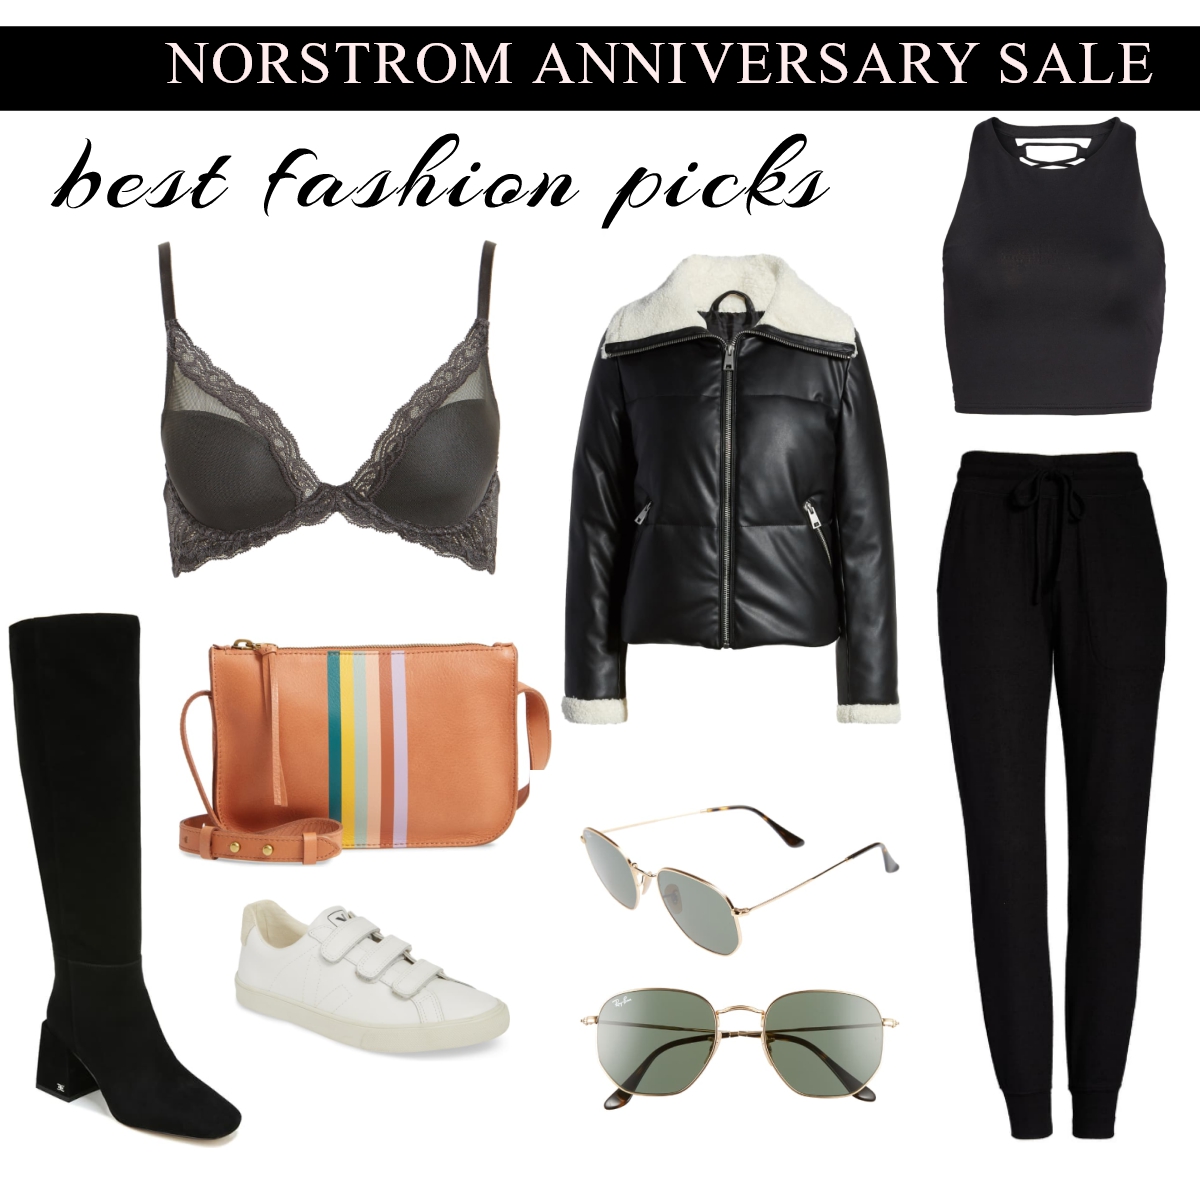 Nordstrom Anniversary Sale 2020: The Best Fashion Picks To Shop Now